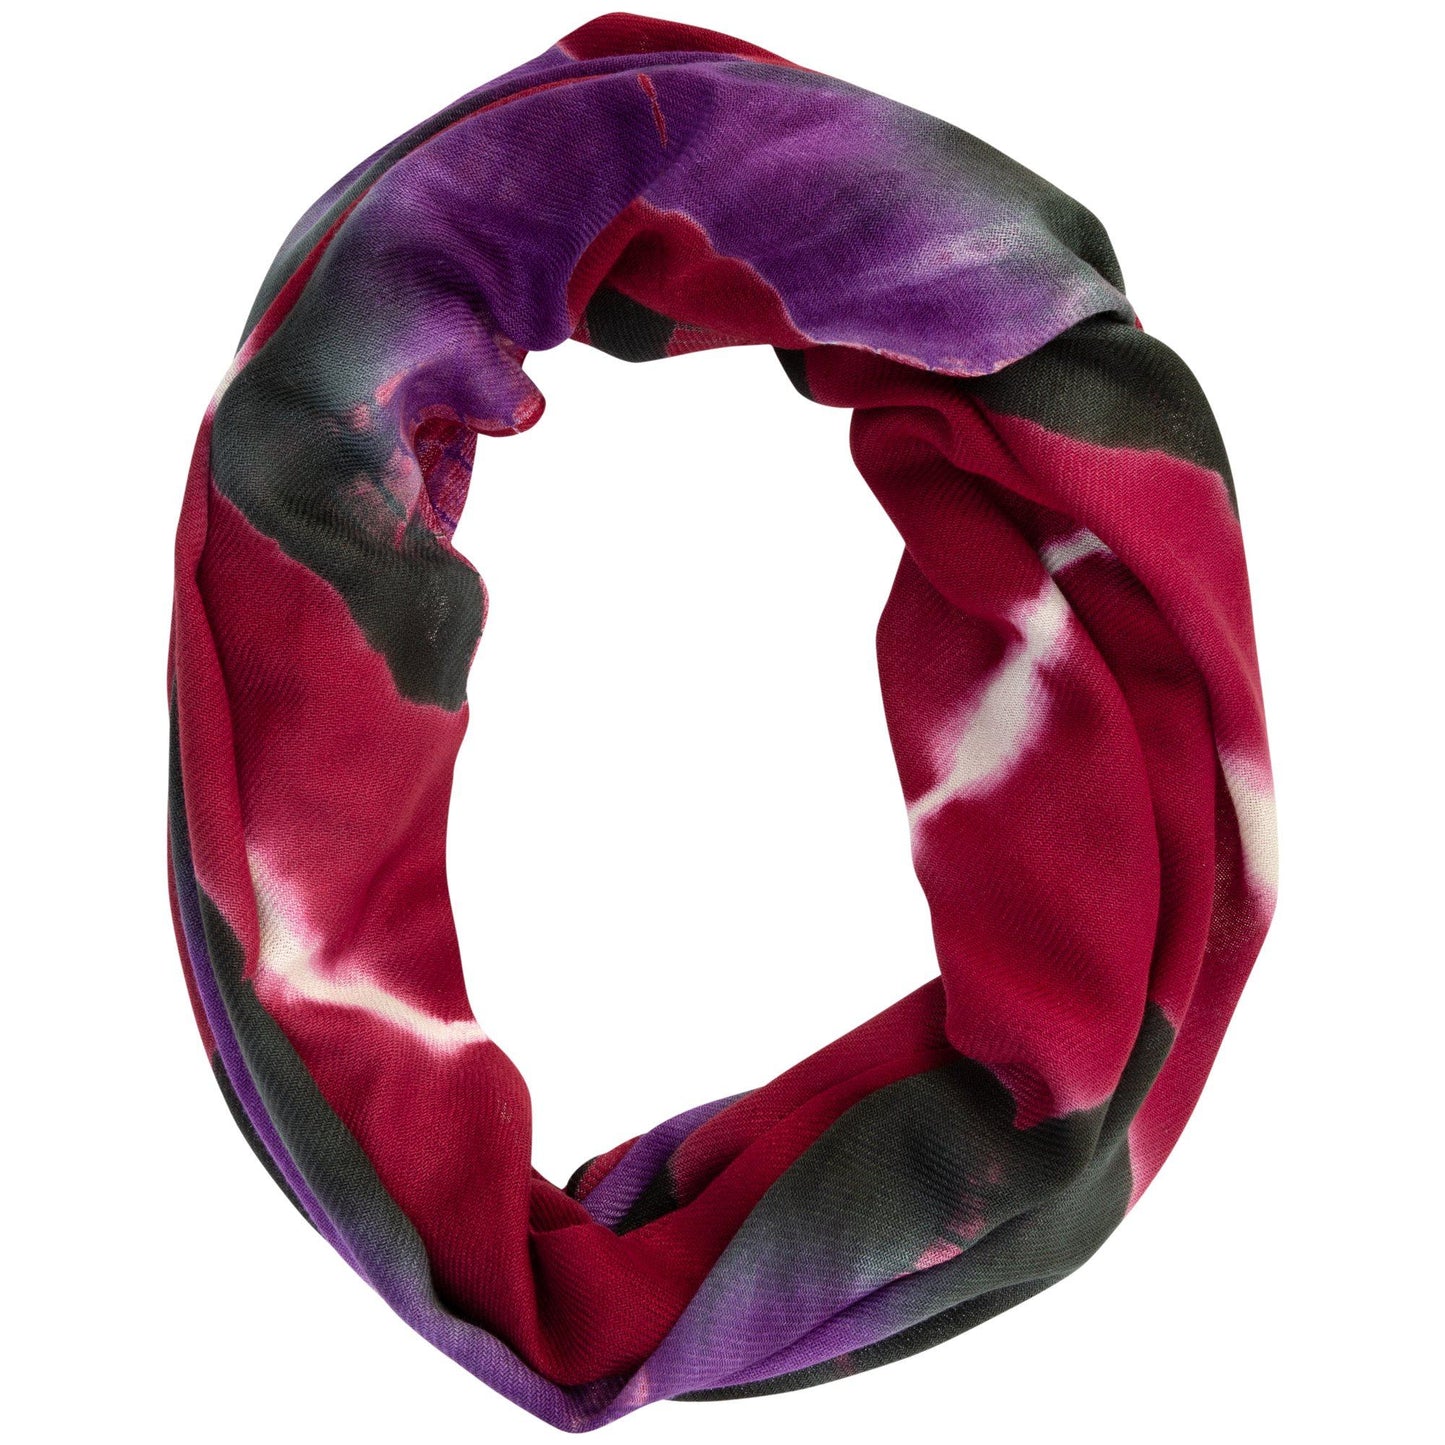 Waves of Color Infinity Scarf